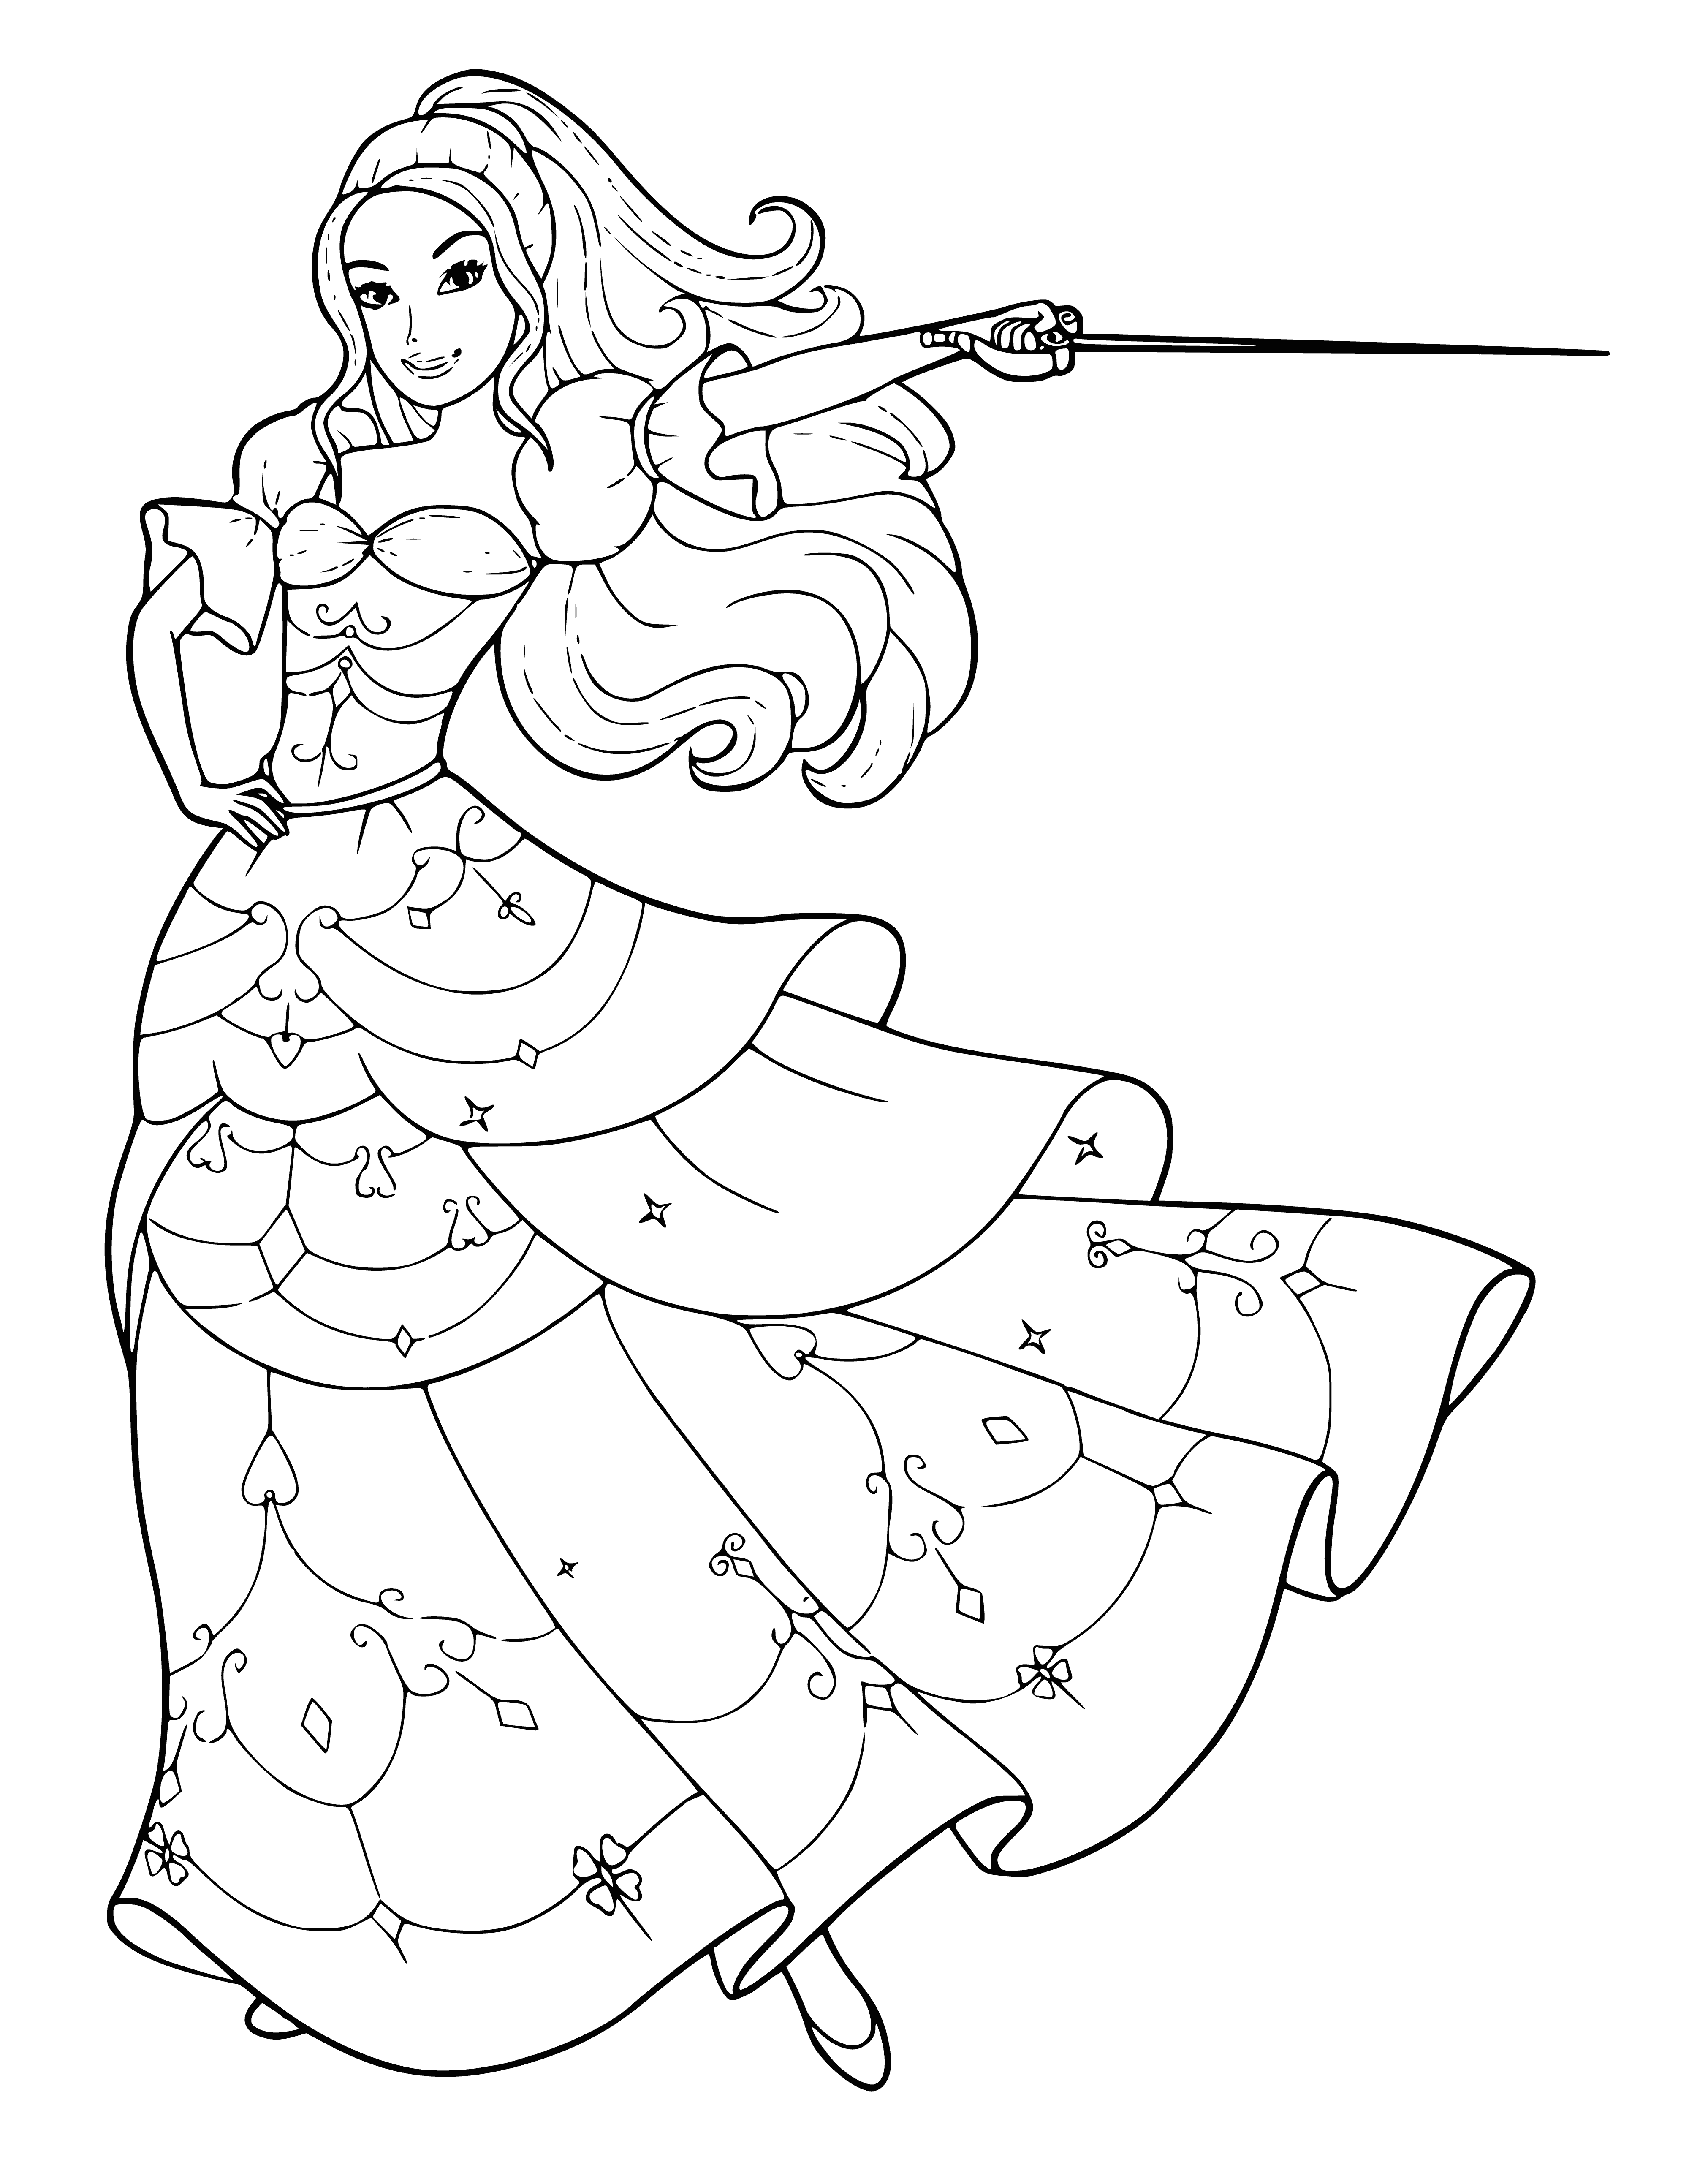 Barbie with a sword coloring page